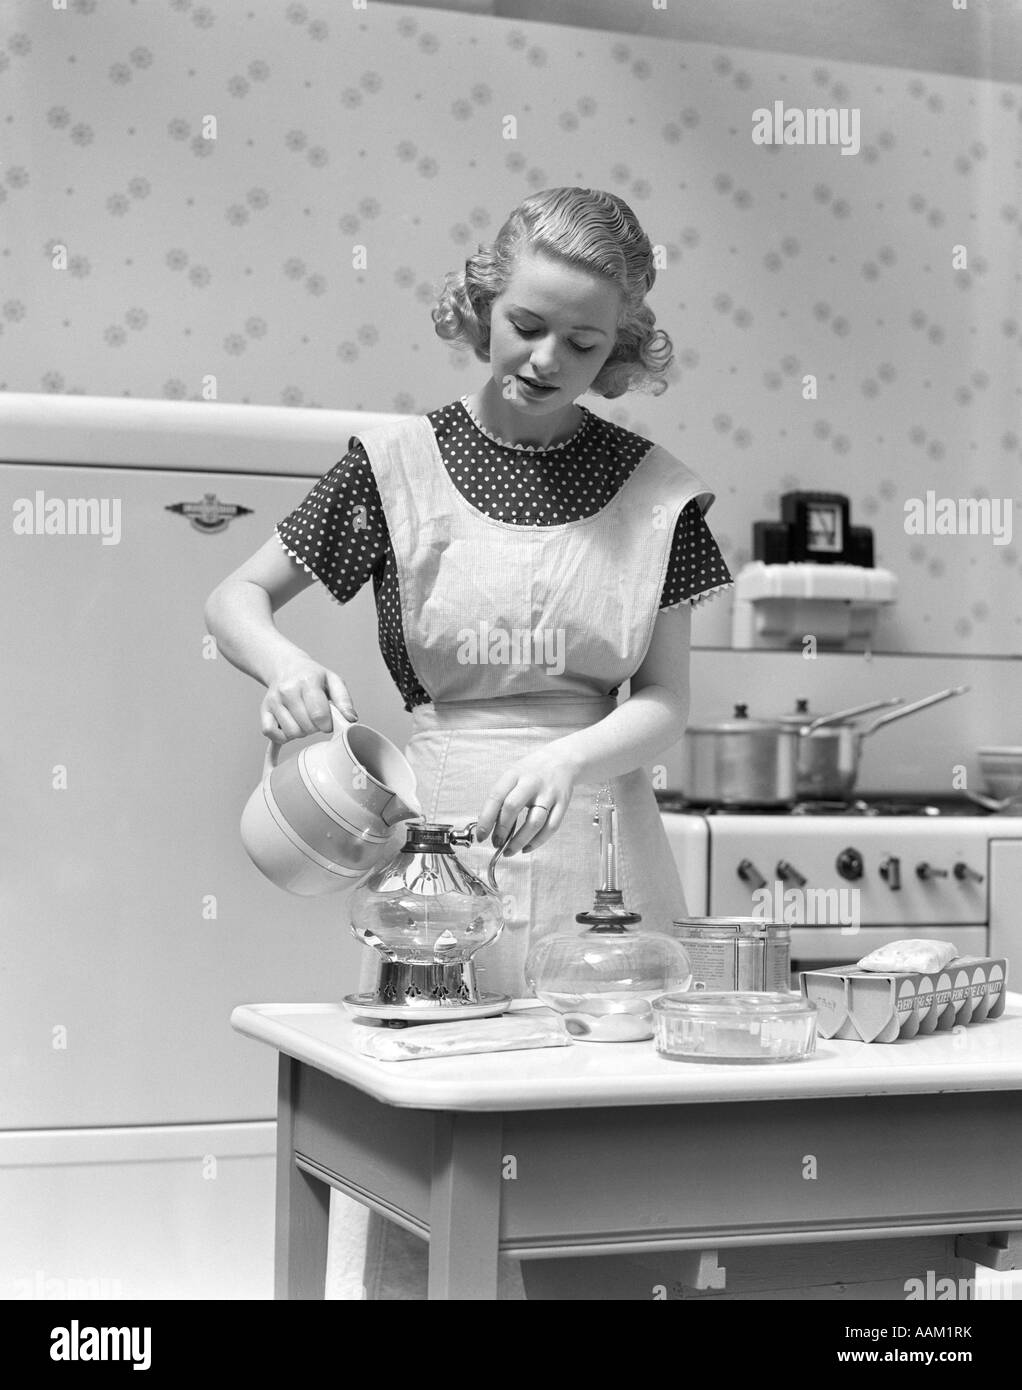 1930s WOMAN IN KITCHEN WEARING APRON MAKING BREAKFAST POURING WATER INTO COFFEE POT Stock Photo